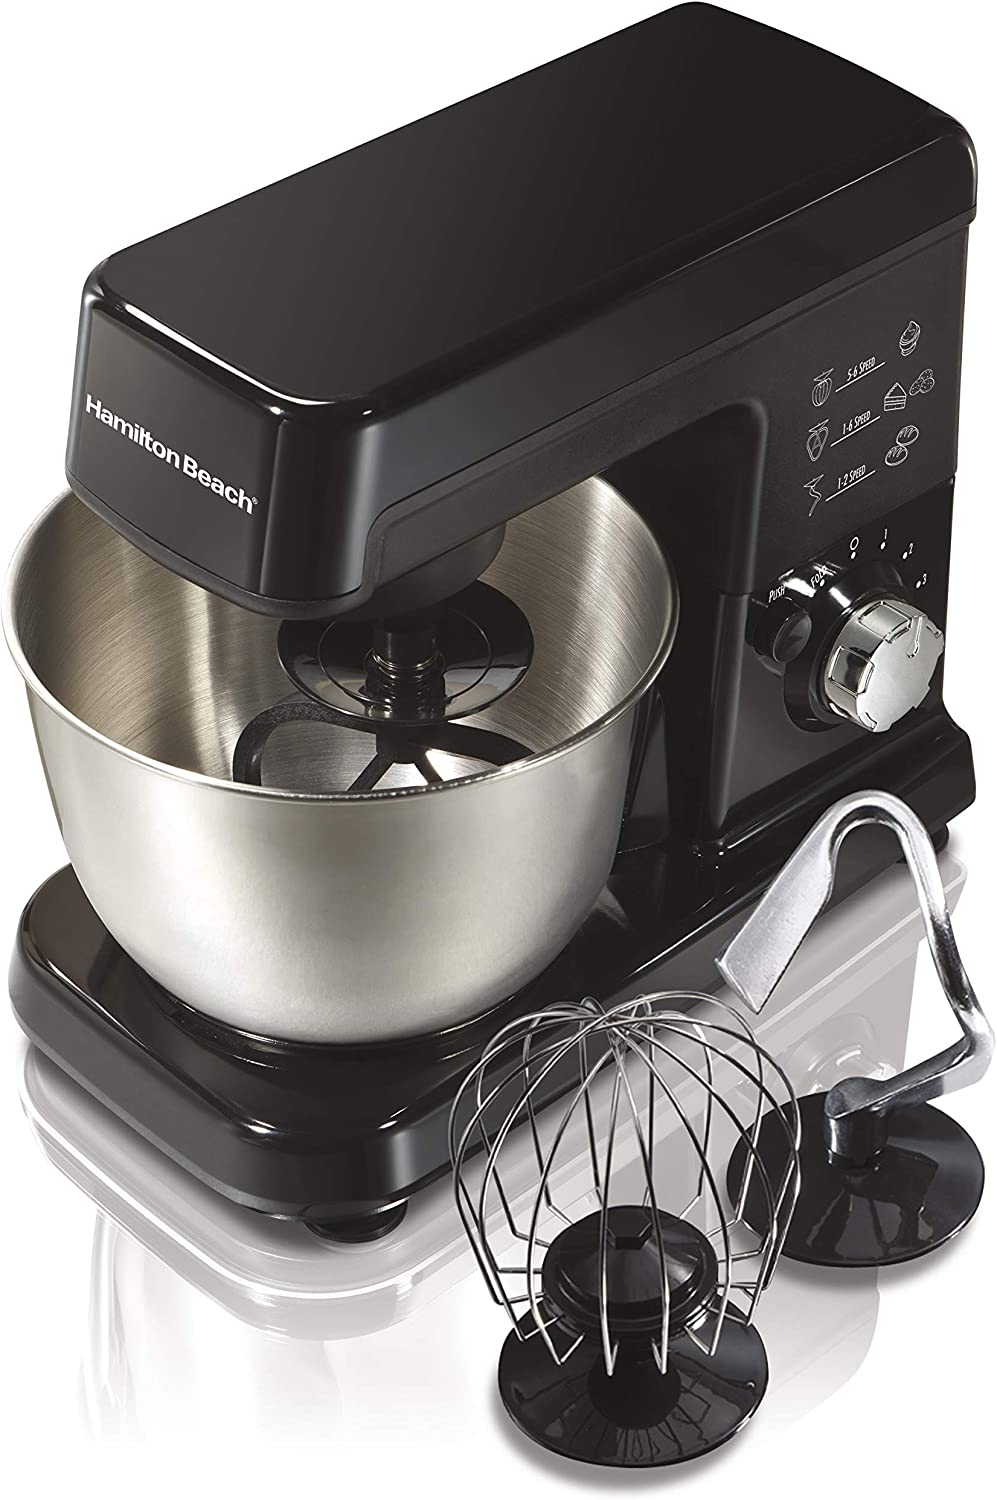 Hamilton Beach 6 Speed Electric Stand Mixer with Stainless Steel 3.5 Quart Bowl, Planetary Mixing, Tilt-Up Head (63326), 300W